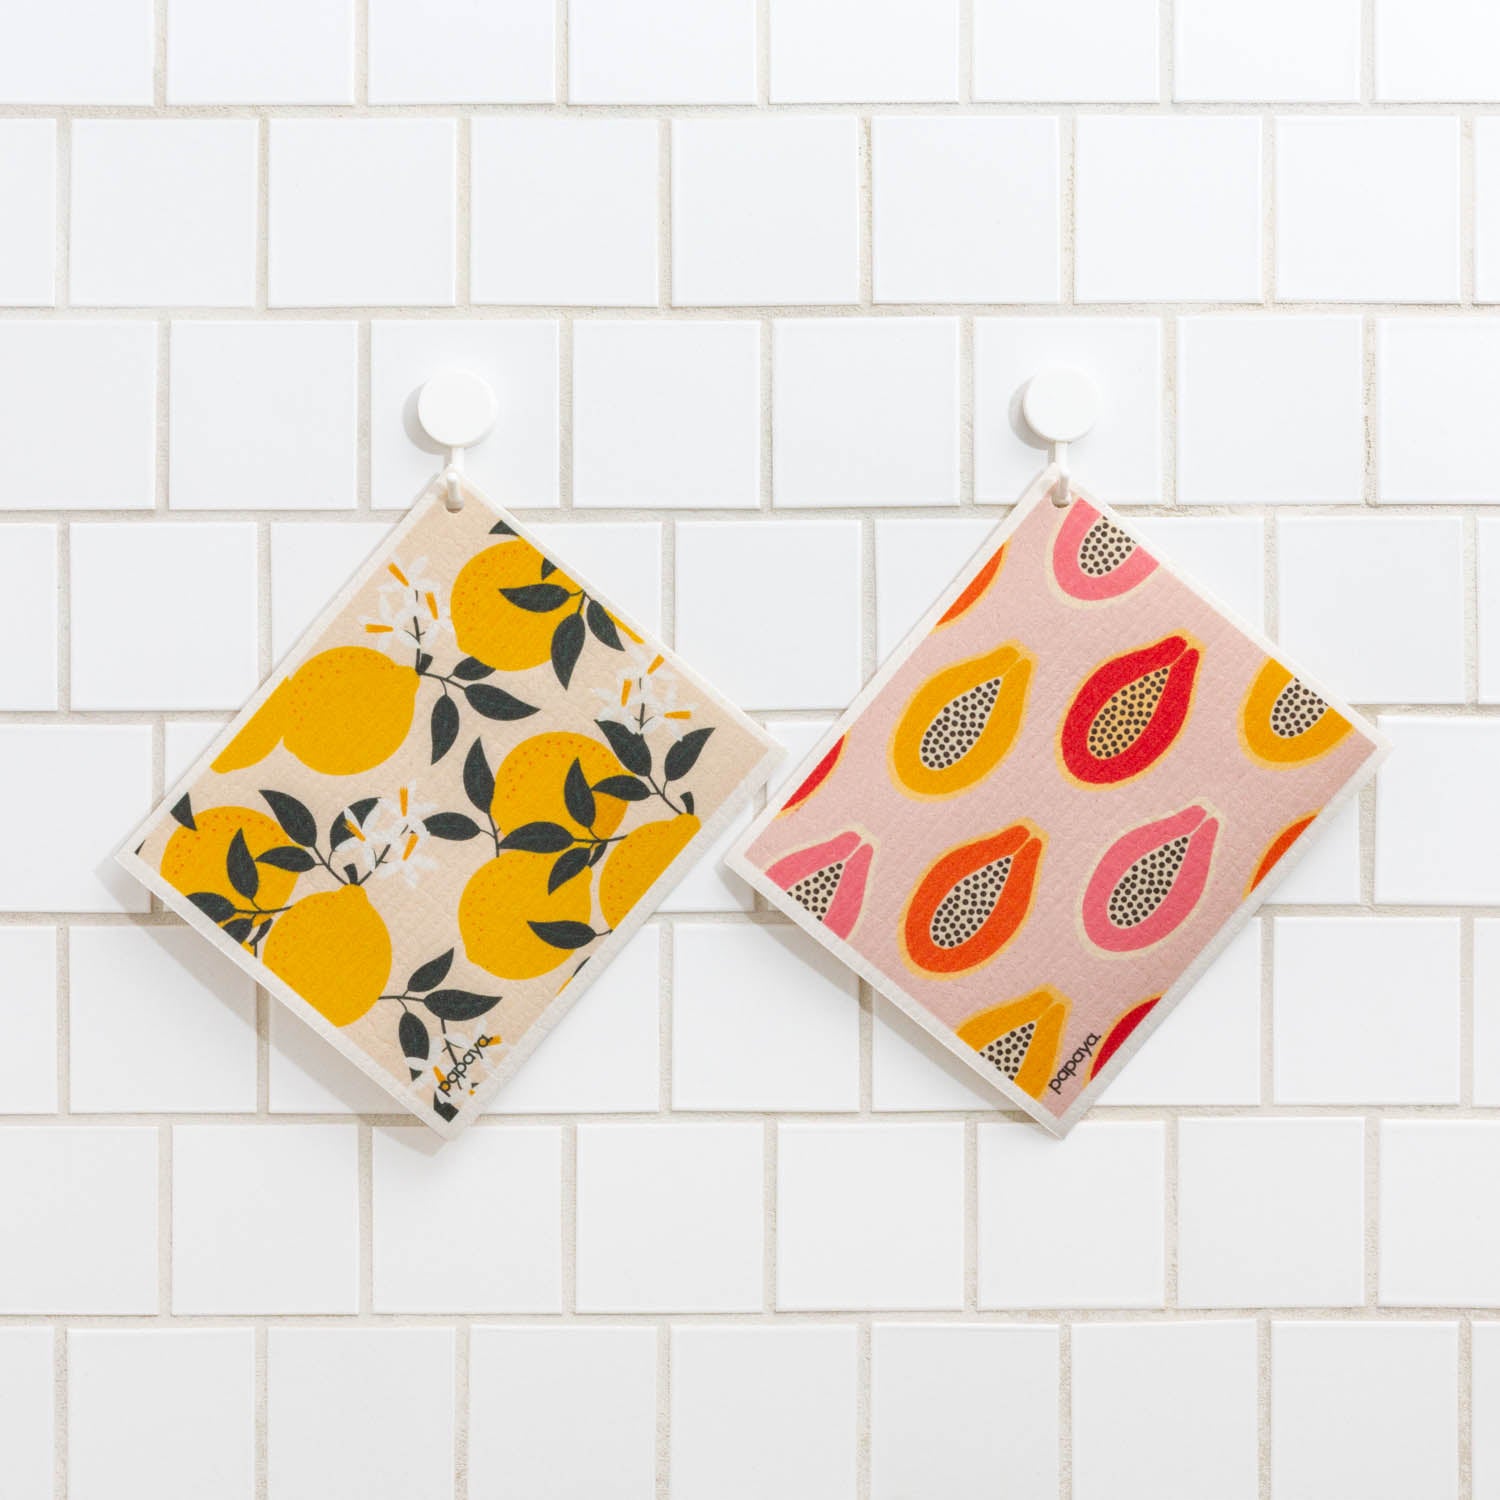 Two reusable paper towels hanging on white tile with cute and colorful lemons and papaya designs